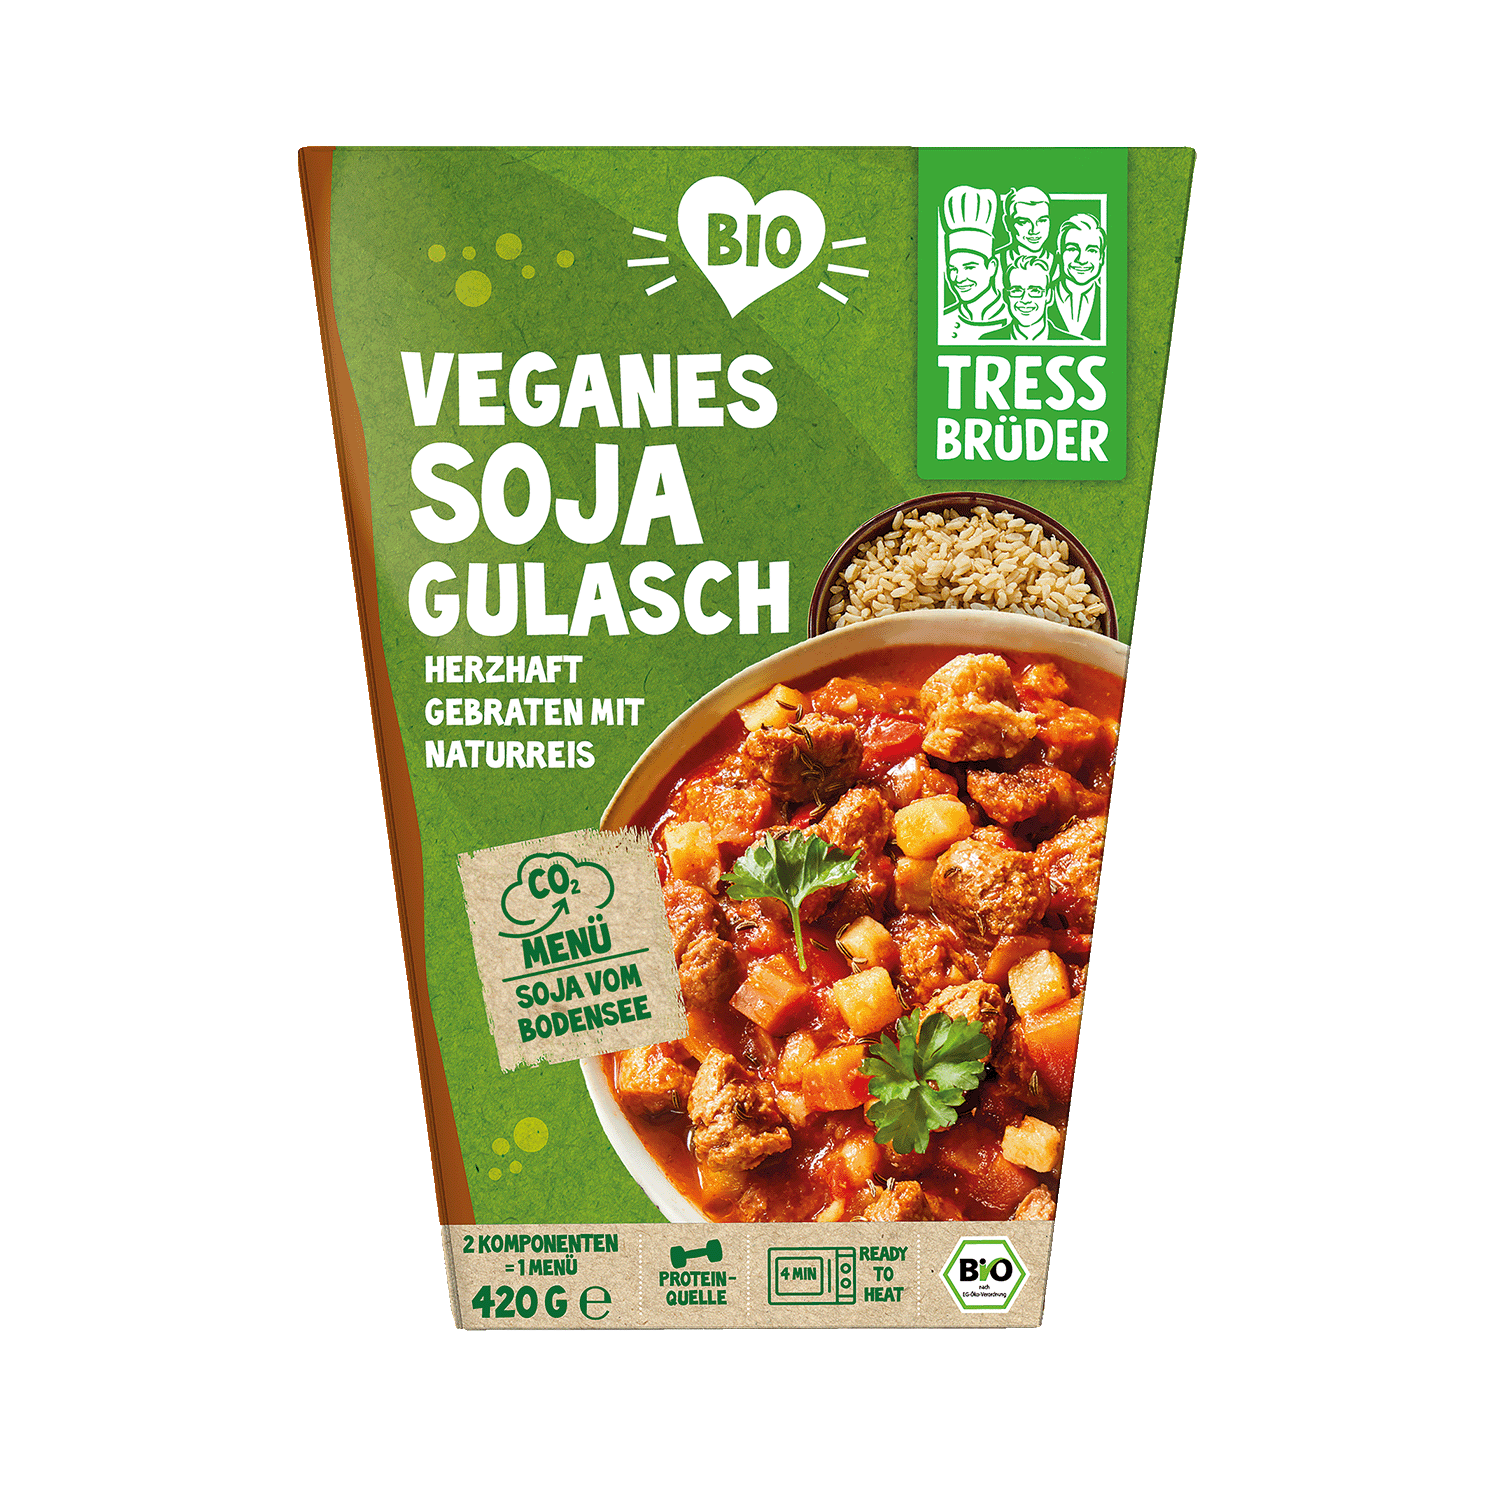 Vegan soya goulash hearty fried with brown rice, Organic, 420g